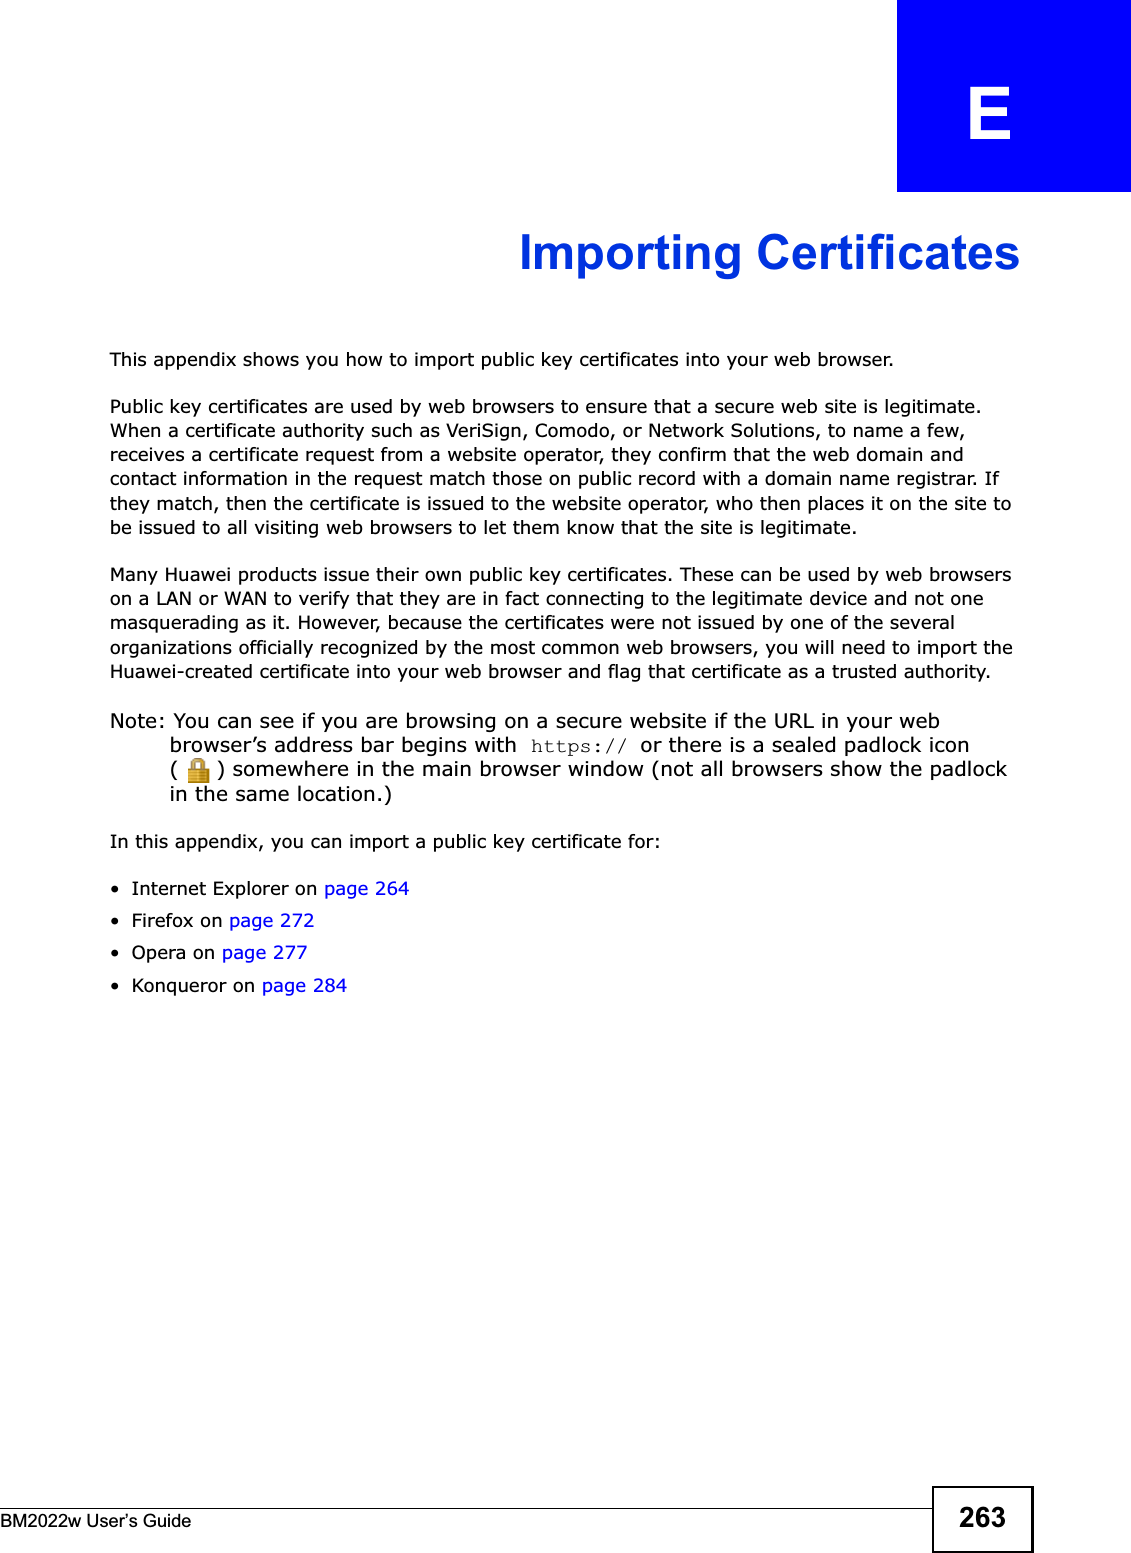 BM2022w User’s Guide 263APPENDIX   EImporting CertificatesThis appendix shows you how to import public key certificates into your web browser. Public key certificates are used by web browsers to ensure that a secure web site is legitimate. When a certificate authority such as VeriSign, Comodo, or Network Solutions, to name a few, receives a certificate request from a website operator, they confirm that the web domain and contact information in the request match those on public record with a domain name registrar. If they match, then the certificate is issued to the website operator, who then places it on the site to be issued to all visiting web browsers to let them know that the site is legitimate.Many Huawei products issue their own public key certificates. These can be used by web browsers on a LAN or WAN to verify that they are in fact connecting to the legitimate device and not one masquerading as it. However, because the certificates were not issued by one of the several organizations officially recognized by the most common web browsers, you will need to import the Huawei-created certificate into your web browser and flag that certificate as a trusted authority.Note: You can see if you are browsing on a secure website if the URL in your web browser’s address bar begins with  https:// or there is a sealed padlock icon ( ) somewhere in the main browser window (not all browsers show the padlock in the same location.)In this appendix, you can import a public key certificate for:• Internet Explorer on page 264•Firefox on page 272•Opera on page 277• Konqueror on page 284